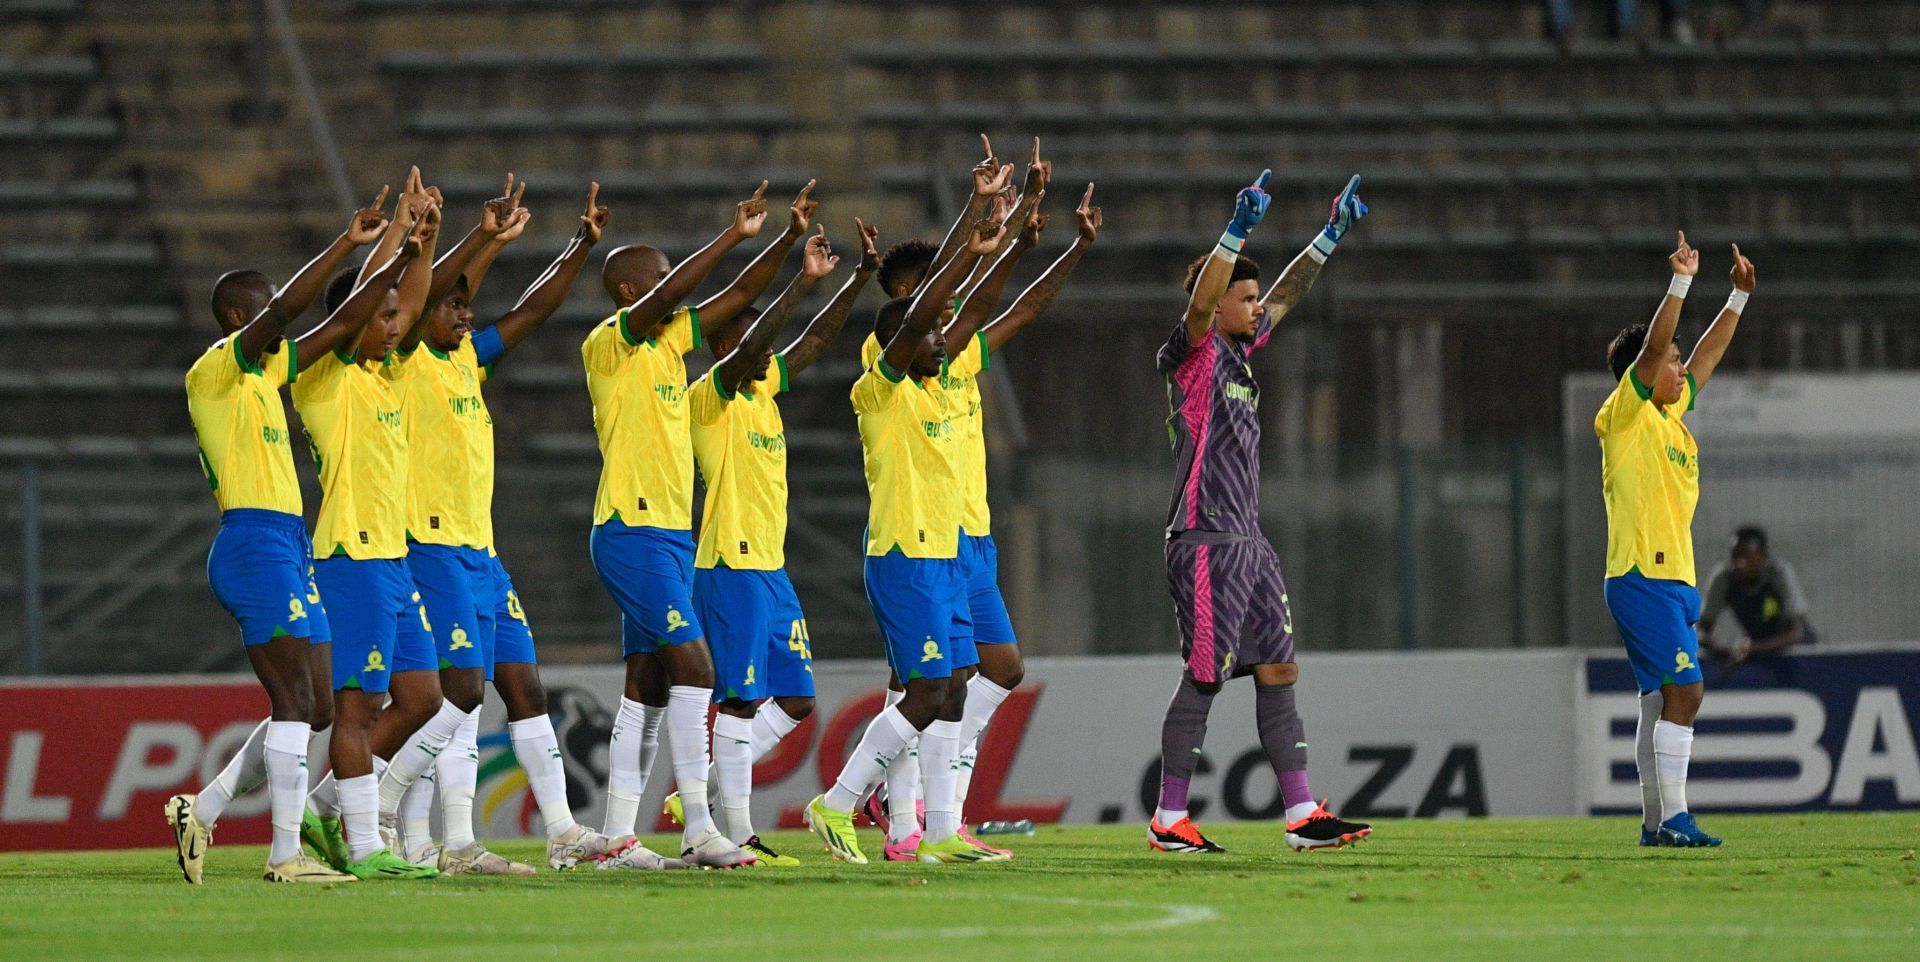 Mamelodi Sundowns host Young Africans on Friday 